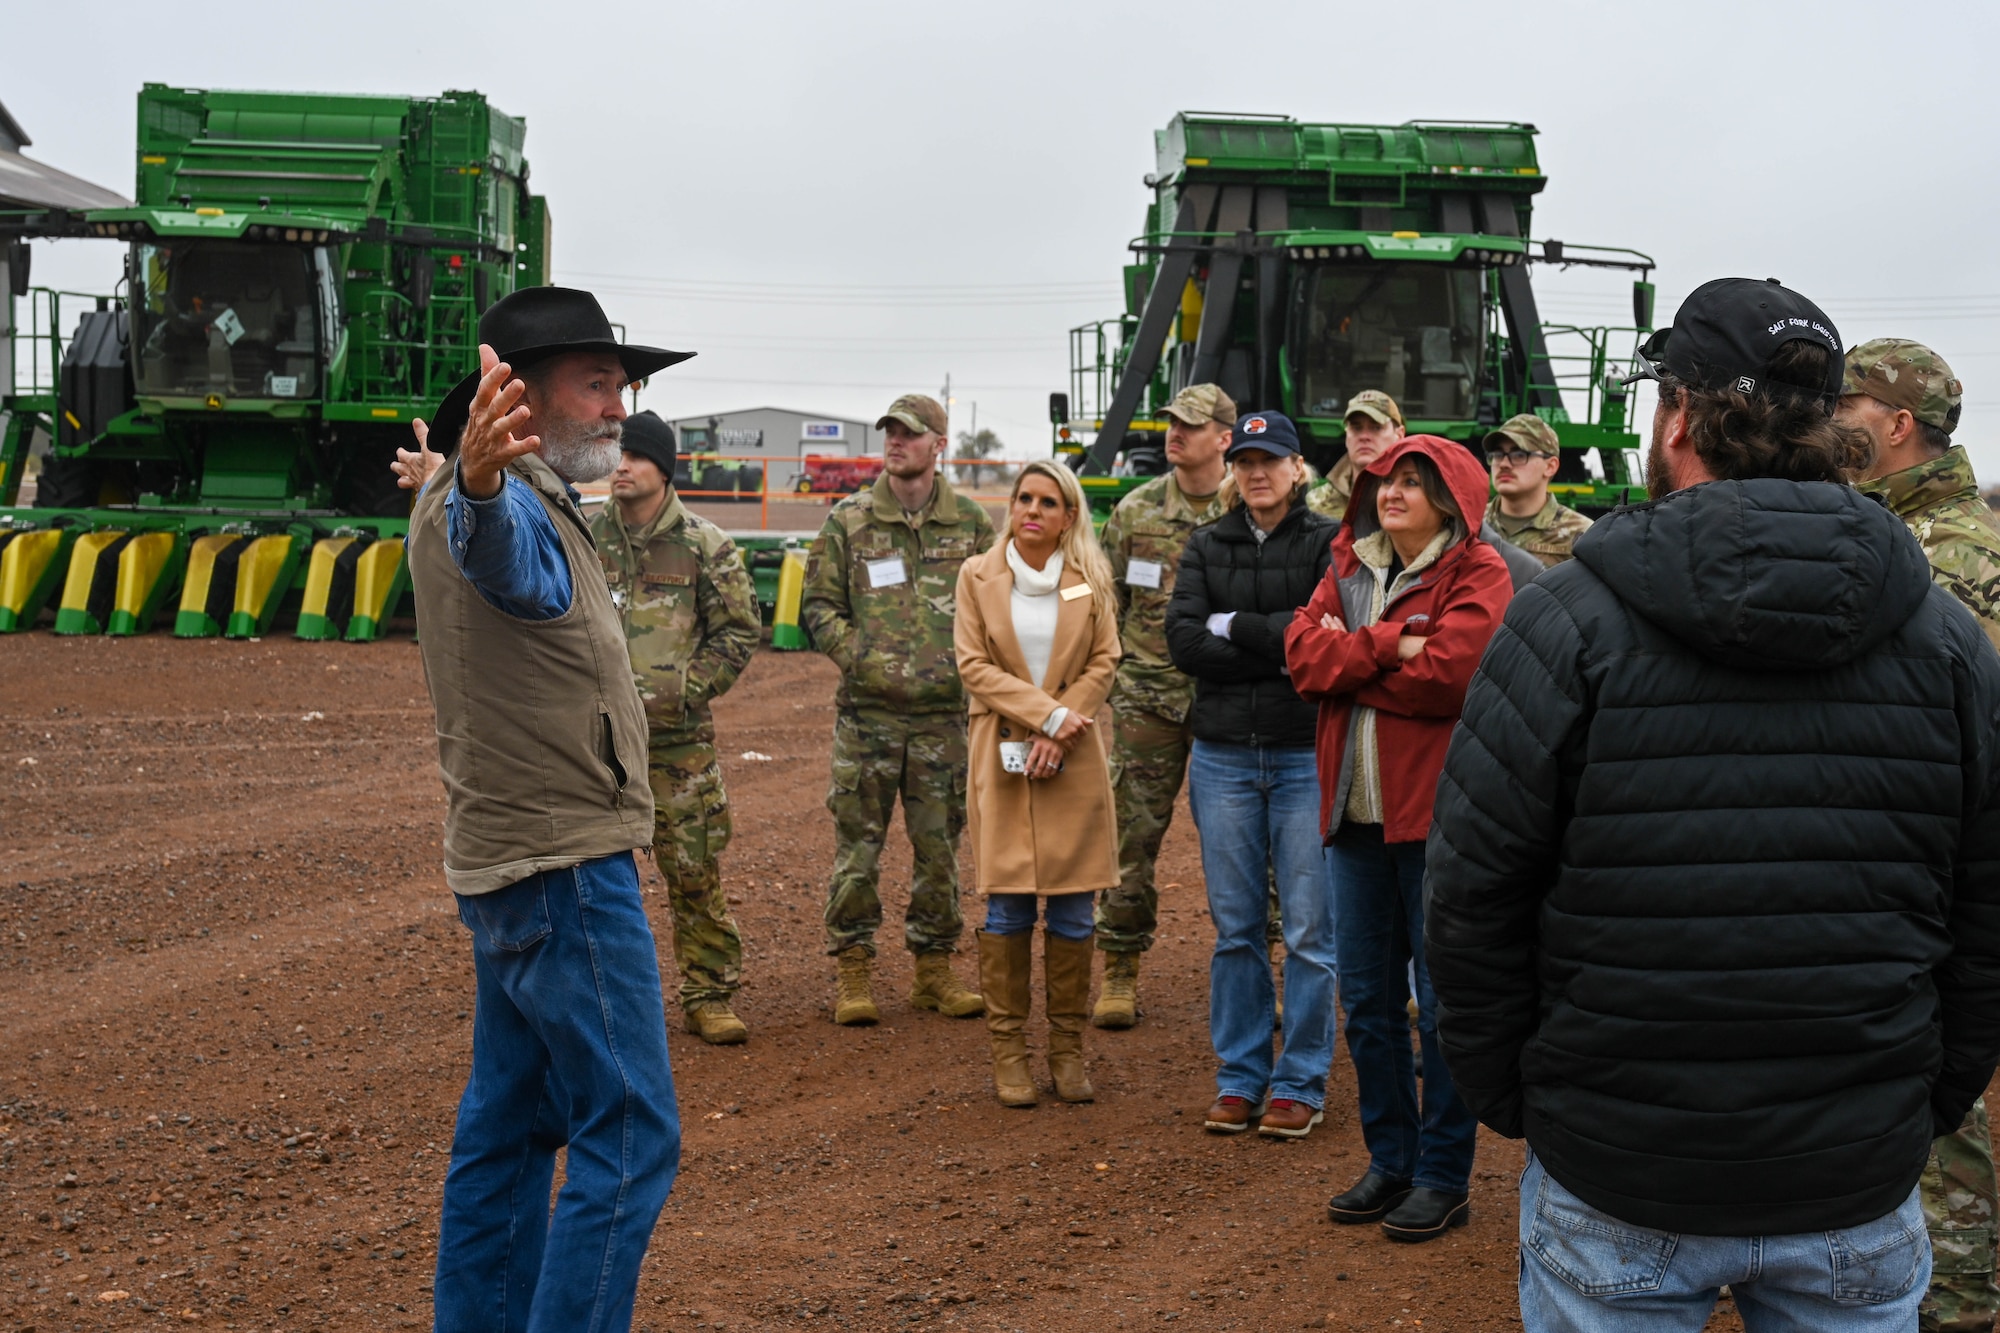 Tom Buchanan, Lugert-Altus Irrigation District manager, talks Airmen from the 97th Air Mobility Wing about cotton harvester machines used at the Cotton Growers Co-op in Altus, Oklahoma, Nov. 30, 2023. This is the 46th year where Airmen and community members have come together to learn more about the role that airpower and agriculture play in national relations (U.S. Air Force photo by Senior Airman Trenton Jancze)